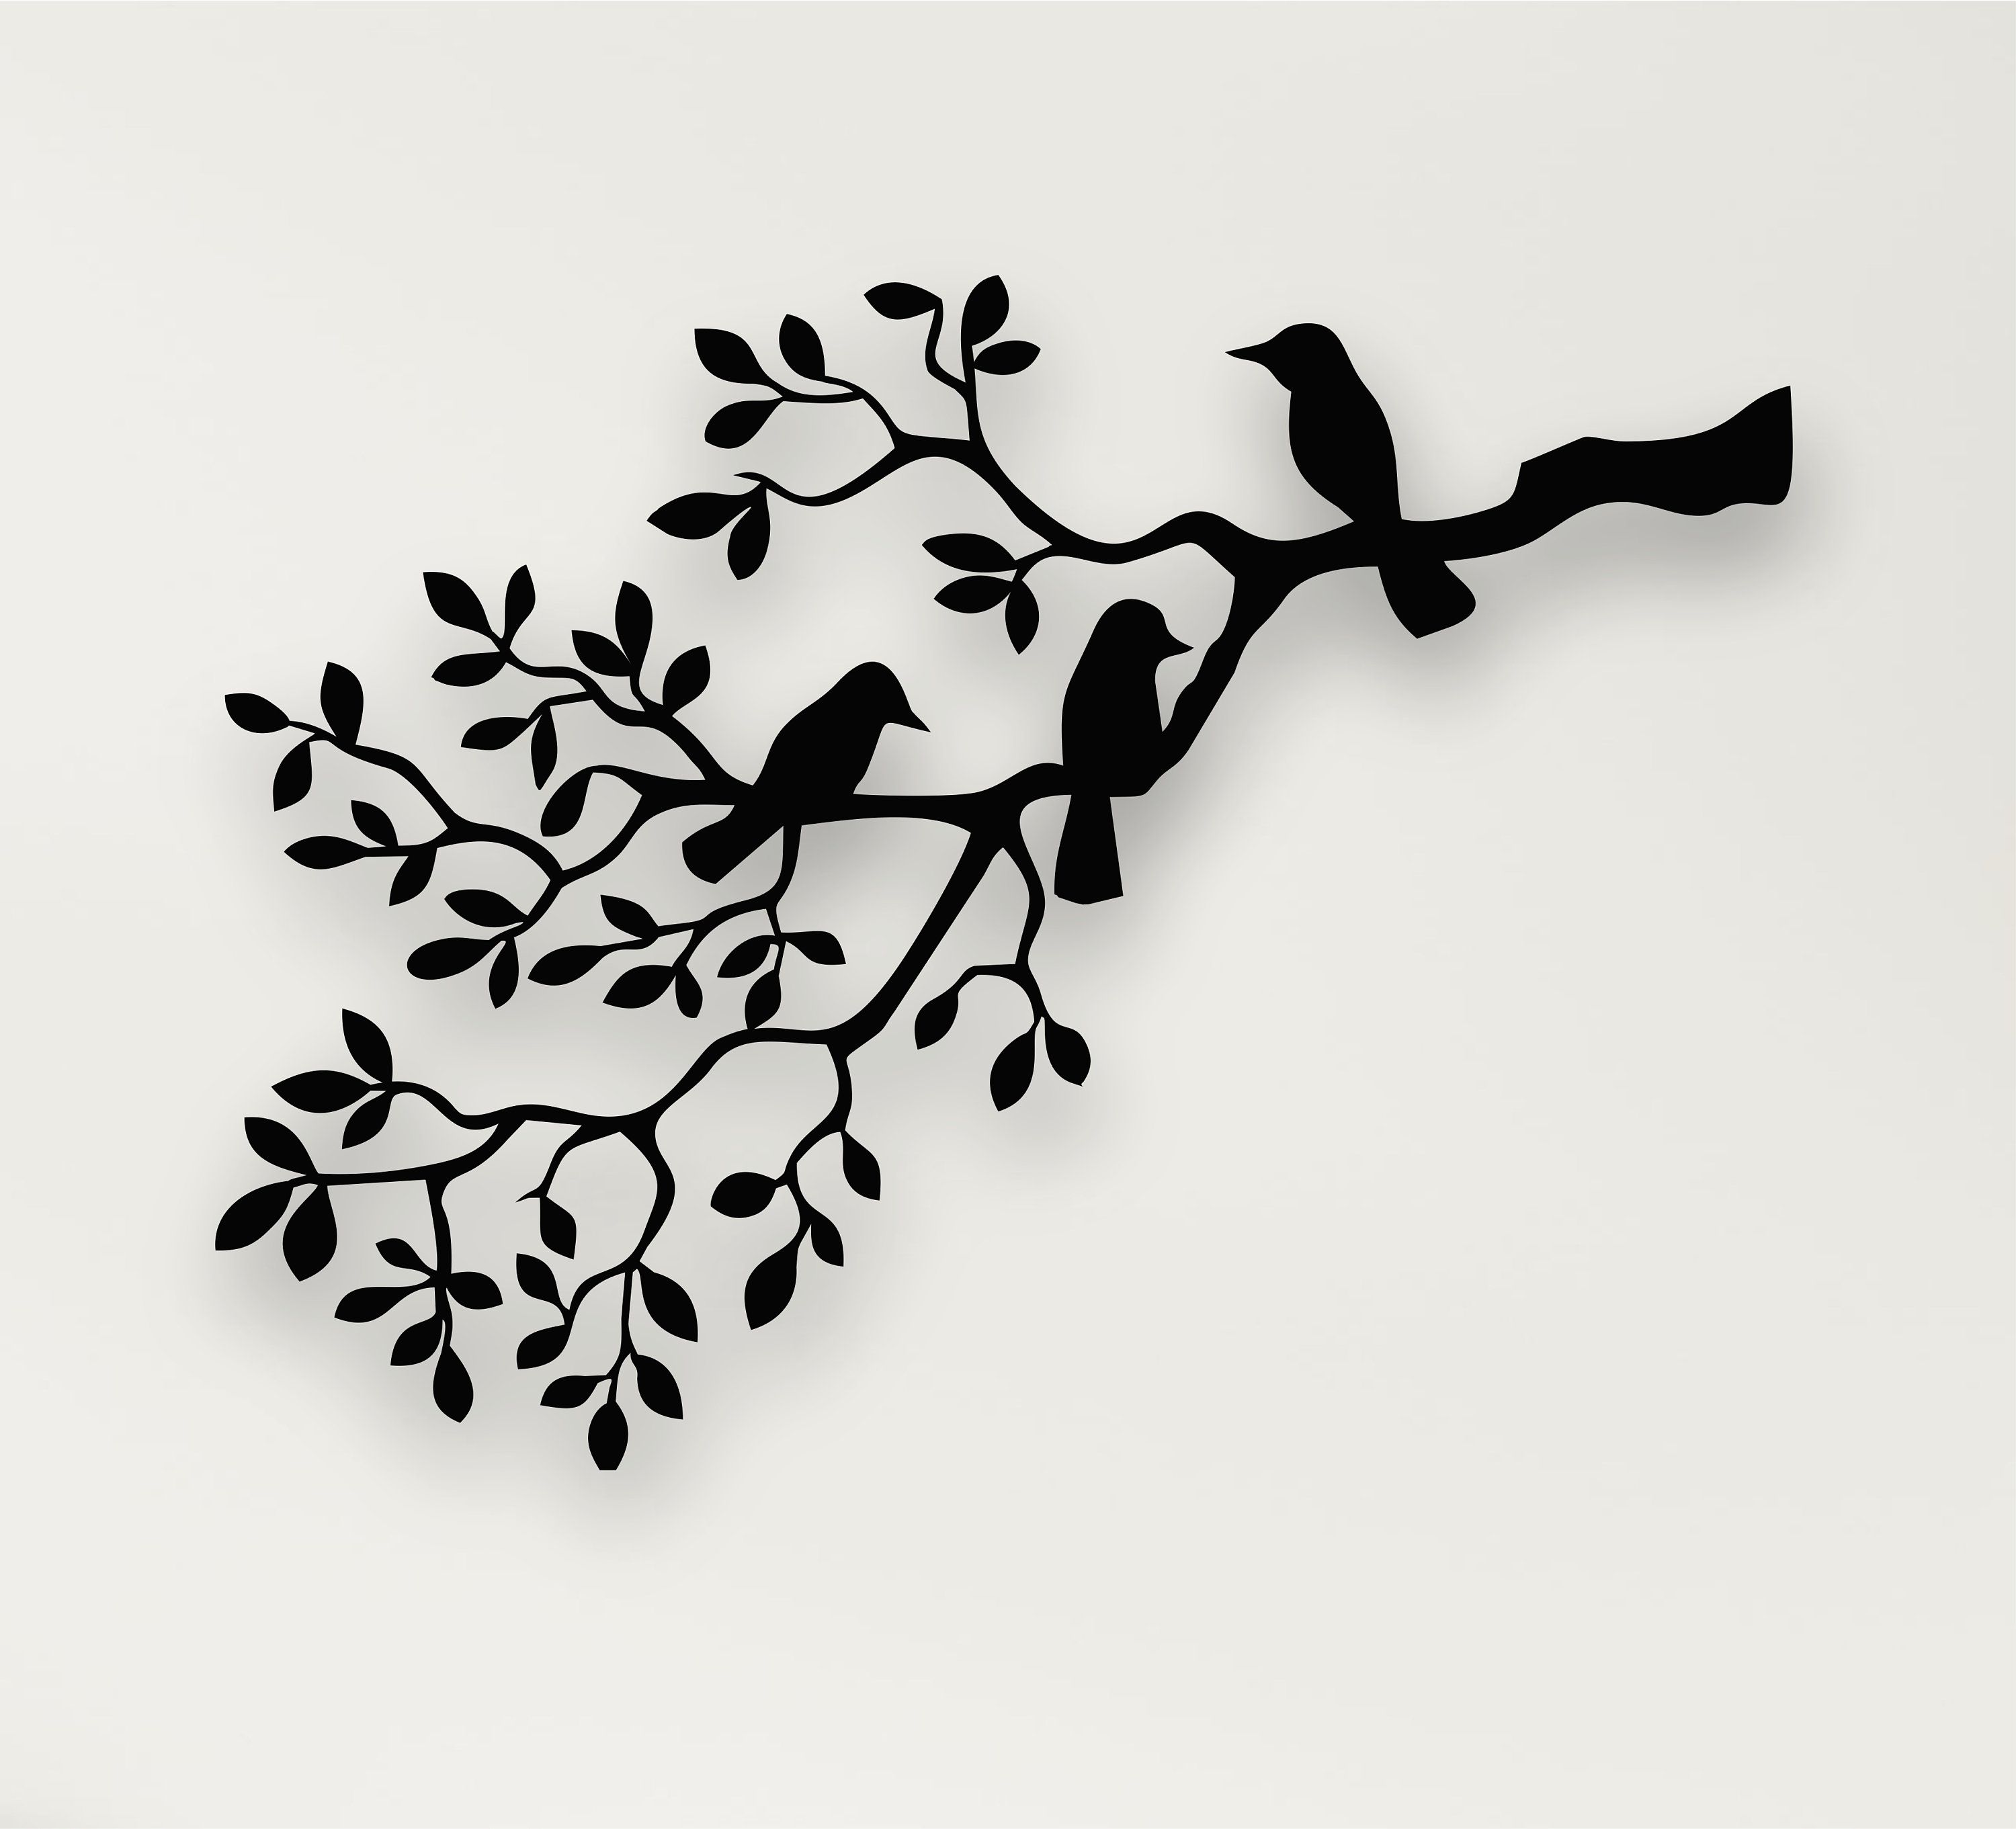 Metal Bird Wall Art In Most Up To Date Metal Wall Decor Birds On Branch Metal Birds Wall Art Metal – Etsy (View 12 of 15)